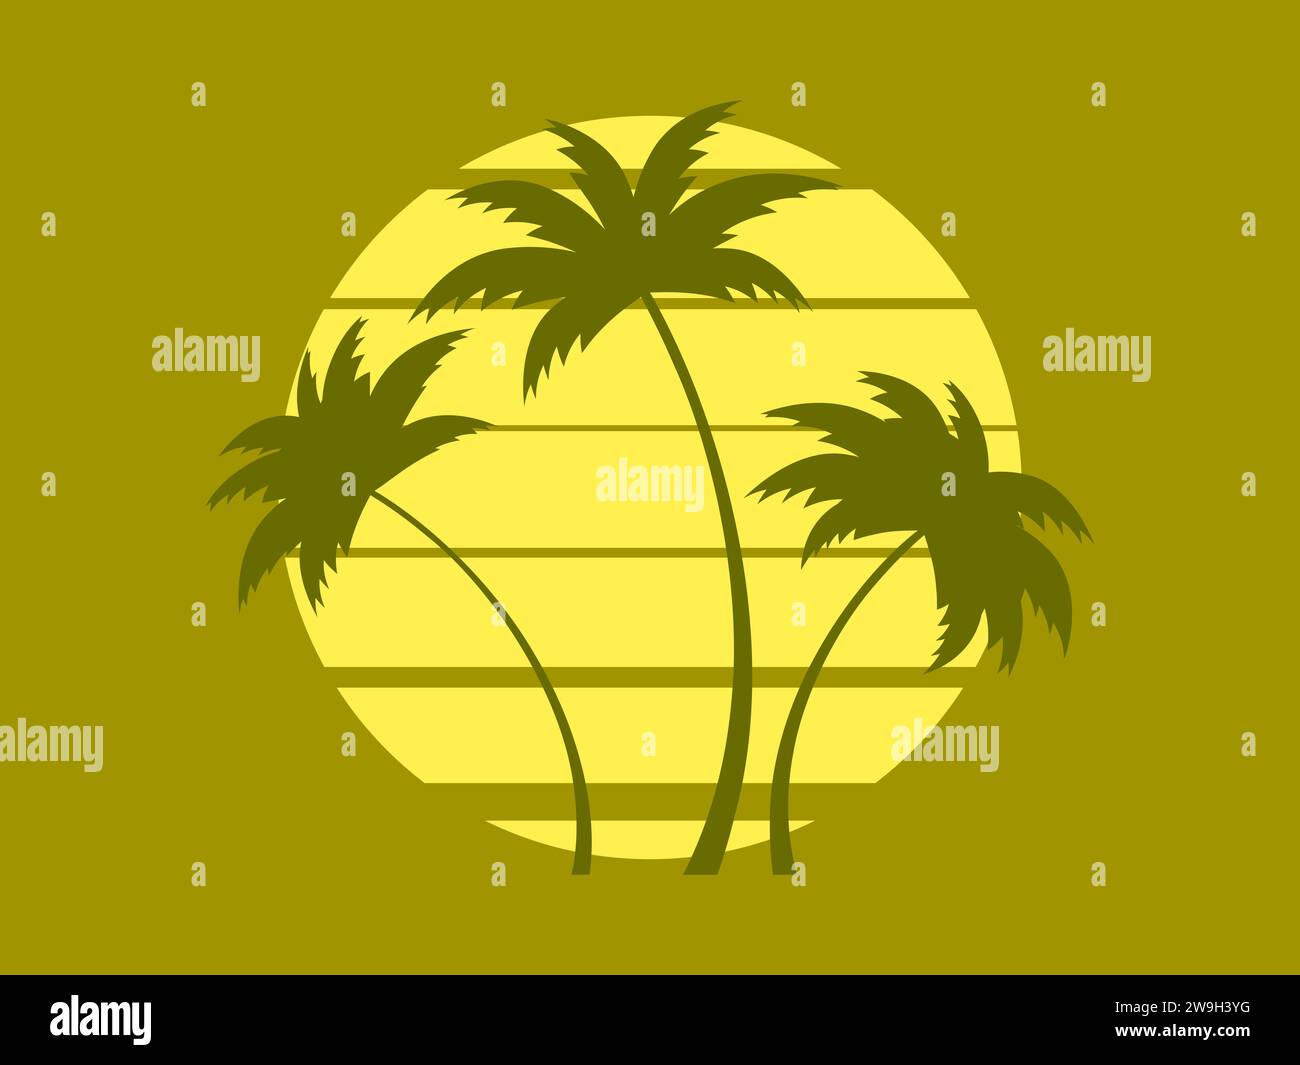 Tropical palm trees at sunset in a futuristic 80s style. Summer time, silhouettes of palm trees in synthwave and retrowave style. Design of advertisin Stock Vector